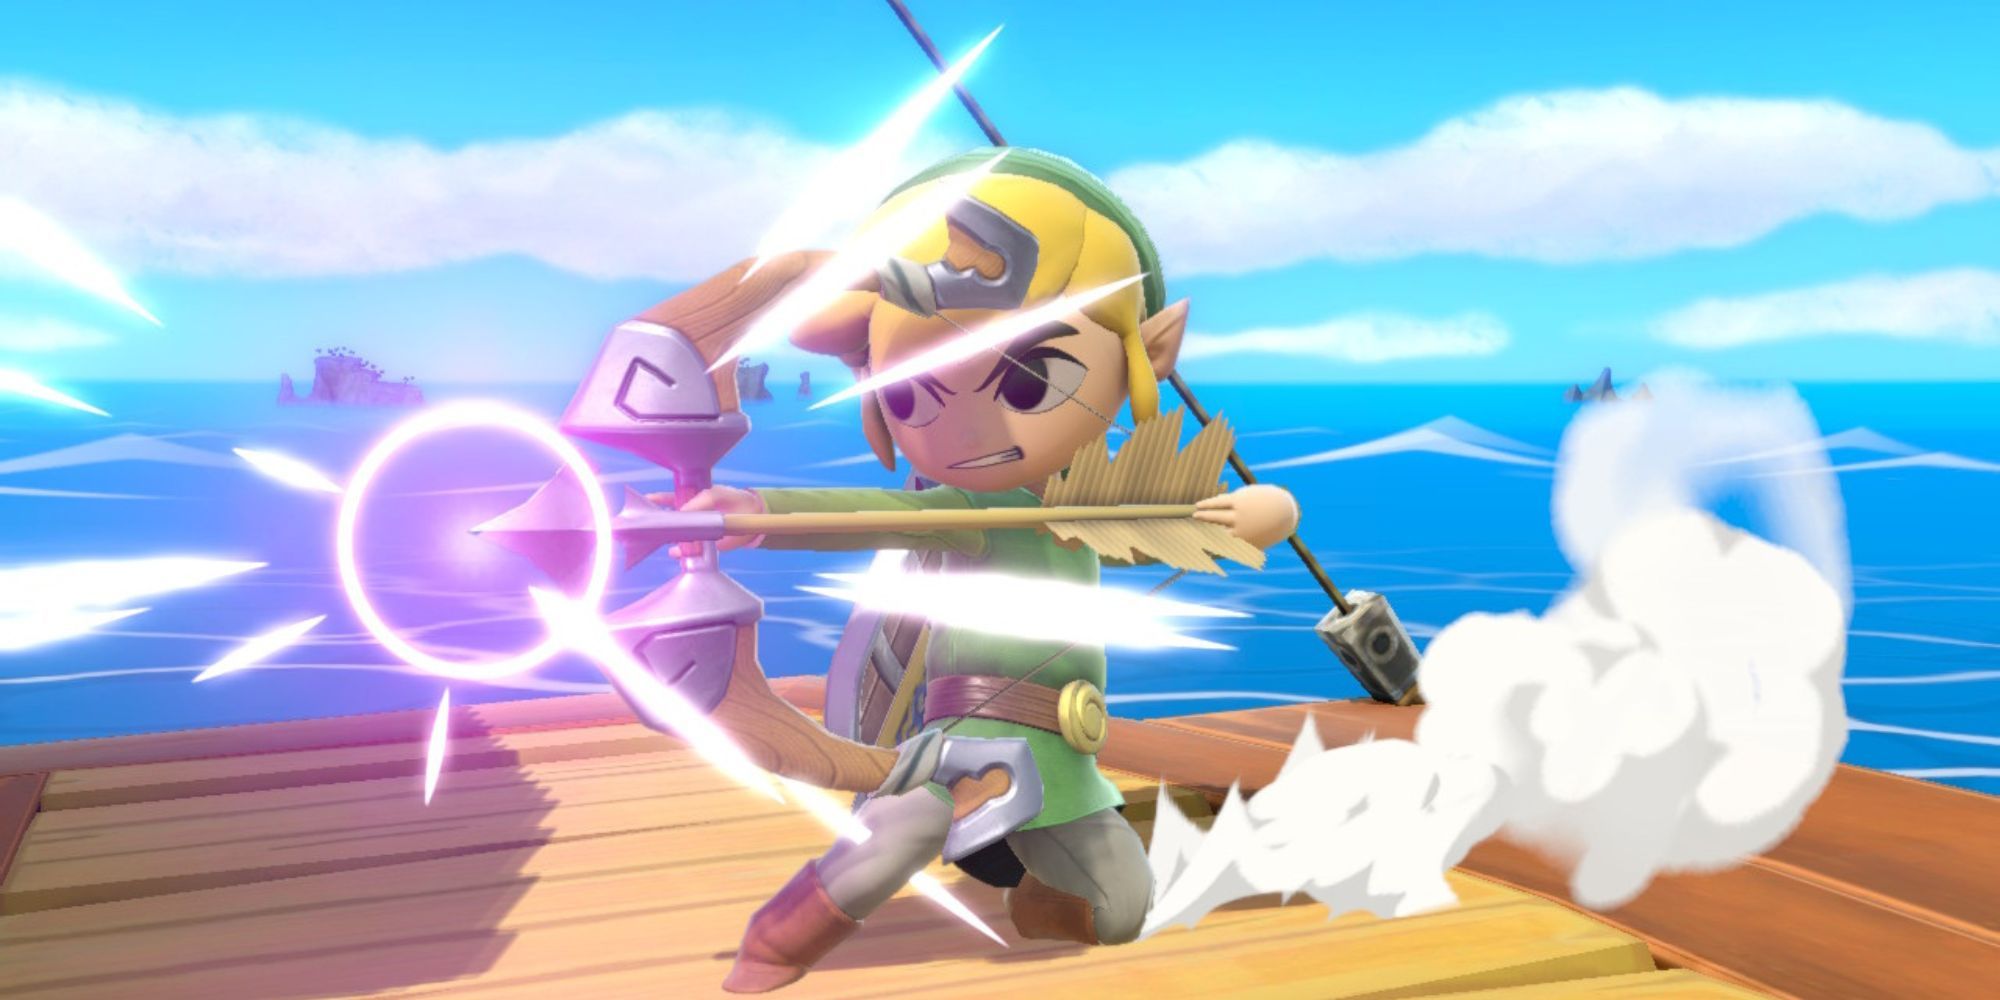 Toon Link prepares to fire an arrow on the Pirate Ship stage